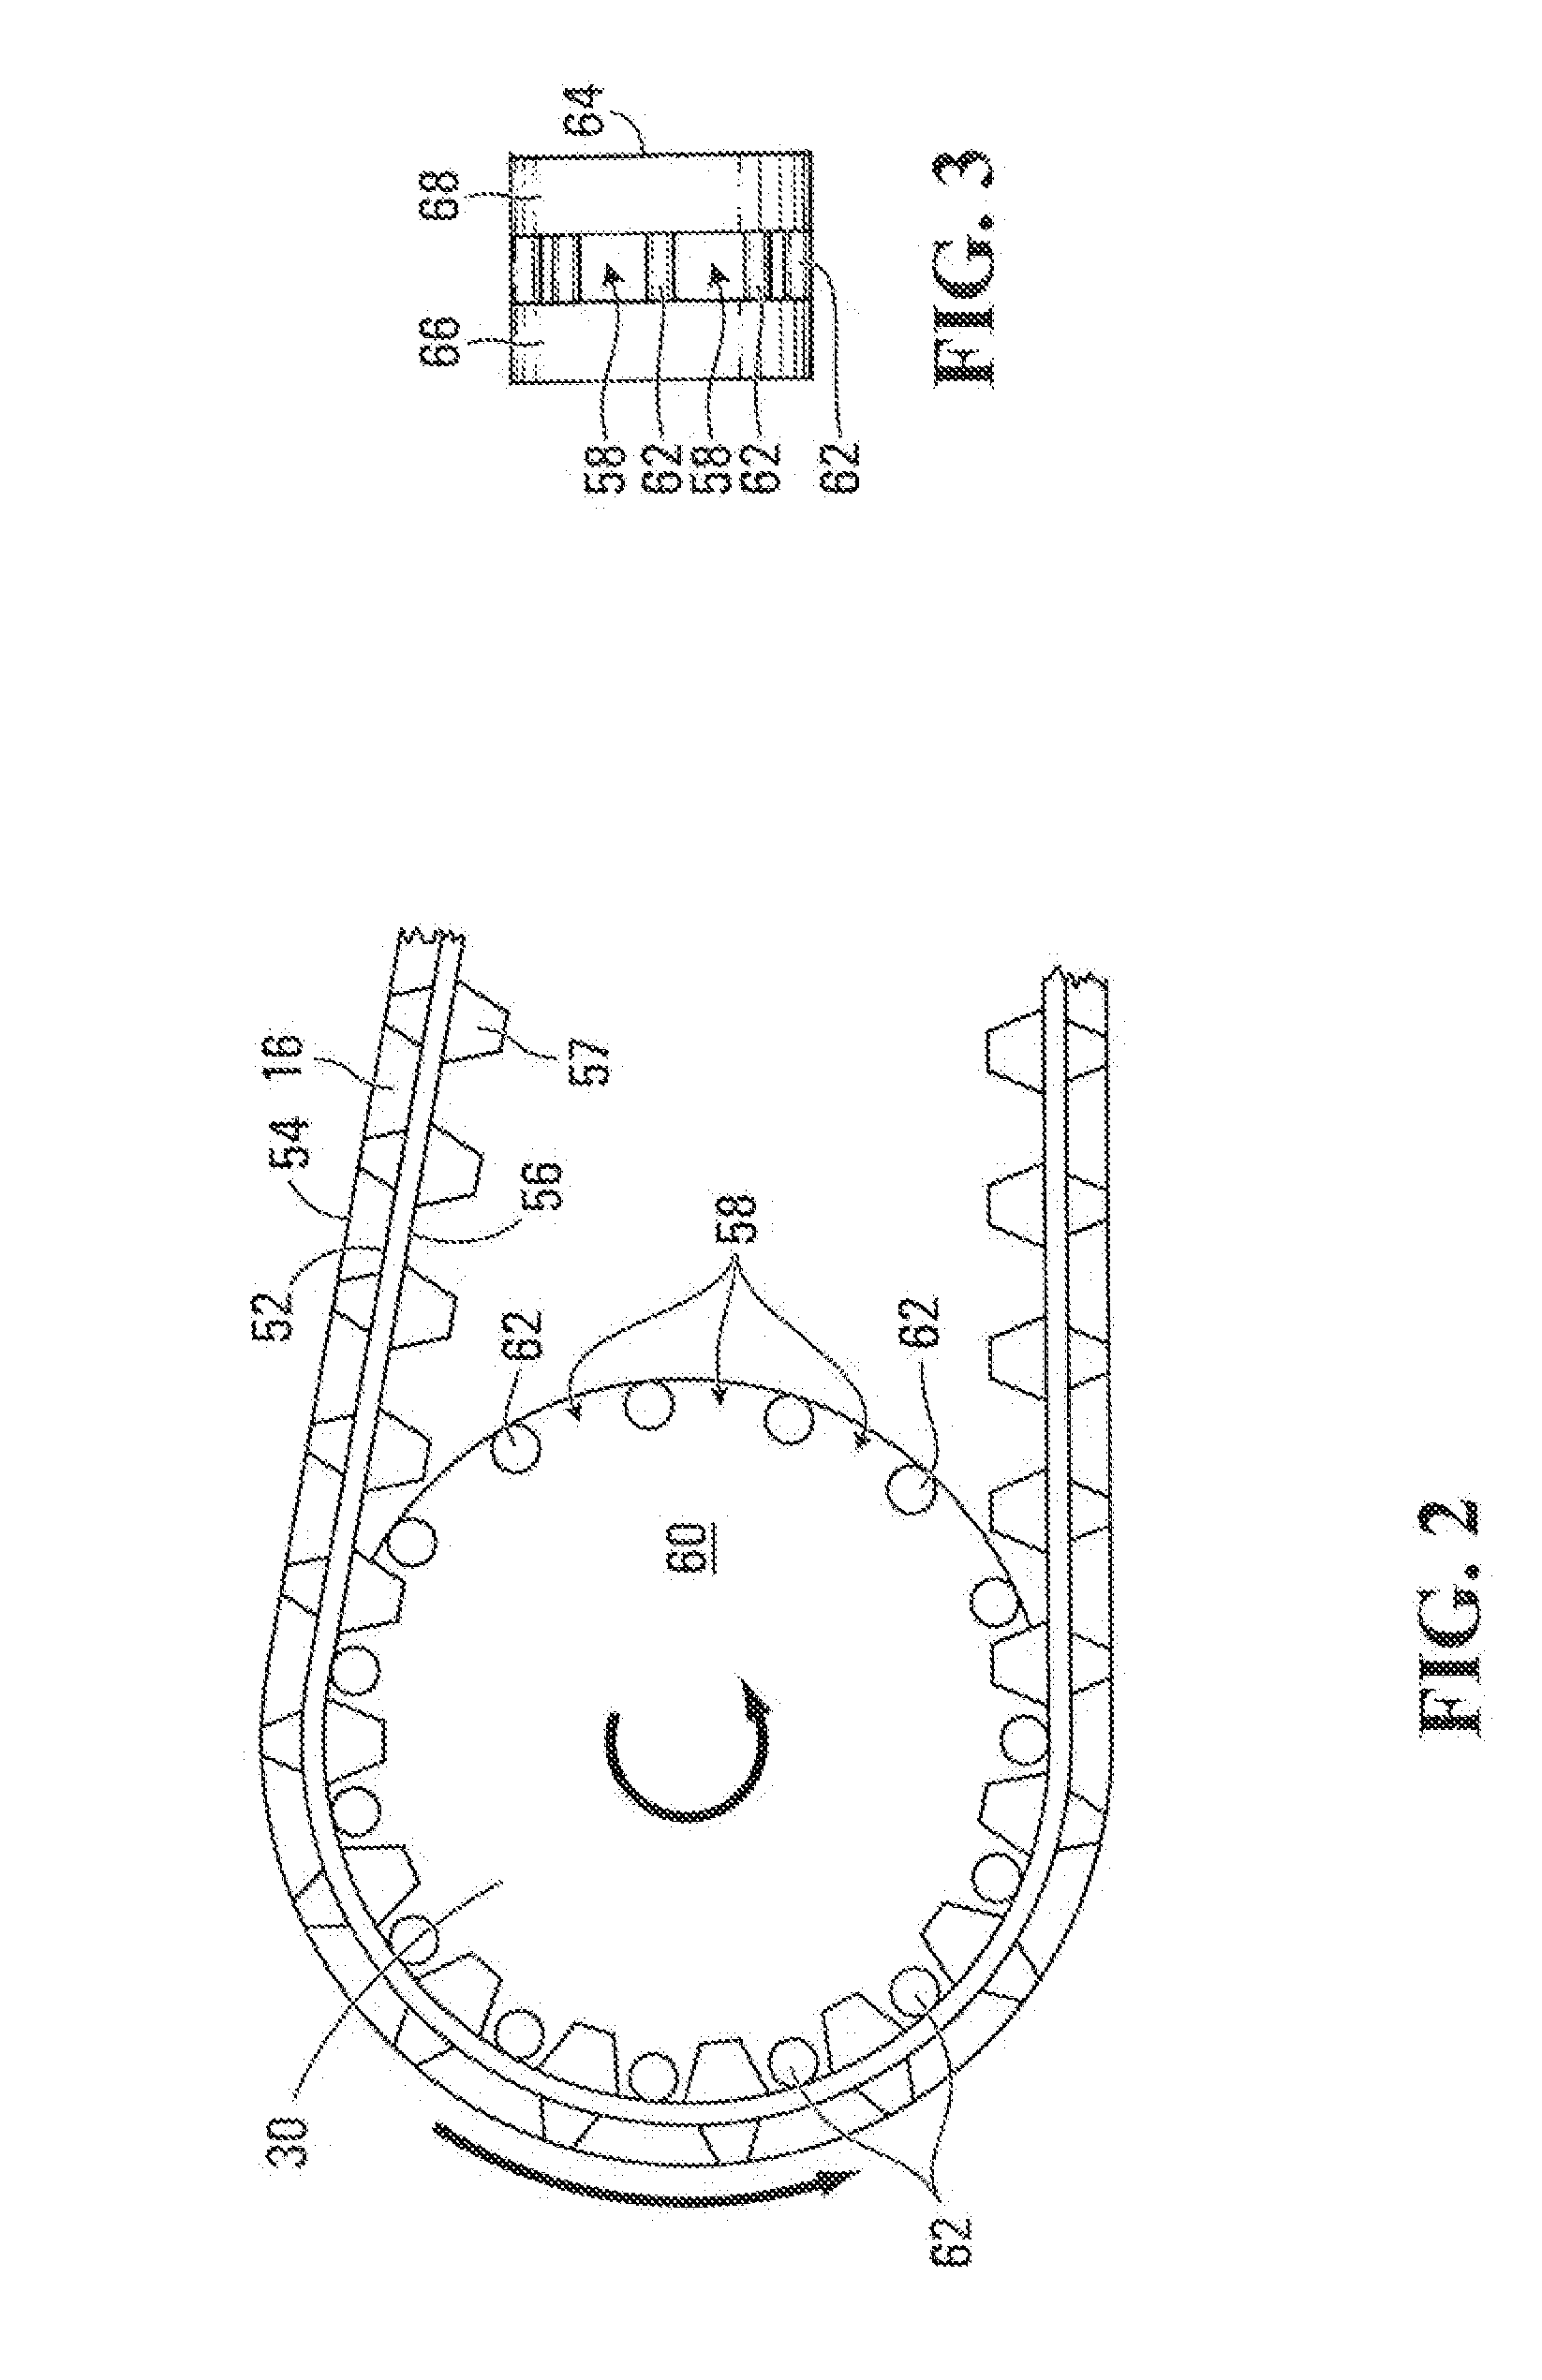 Drive sprocket, drive lug configuration and track drive arrangement for an endless track vehicle